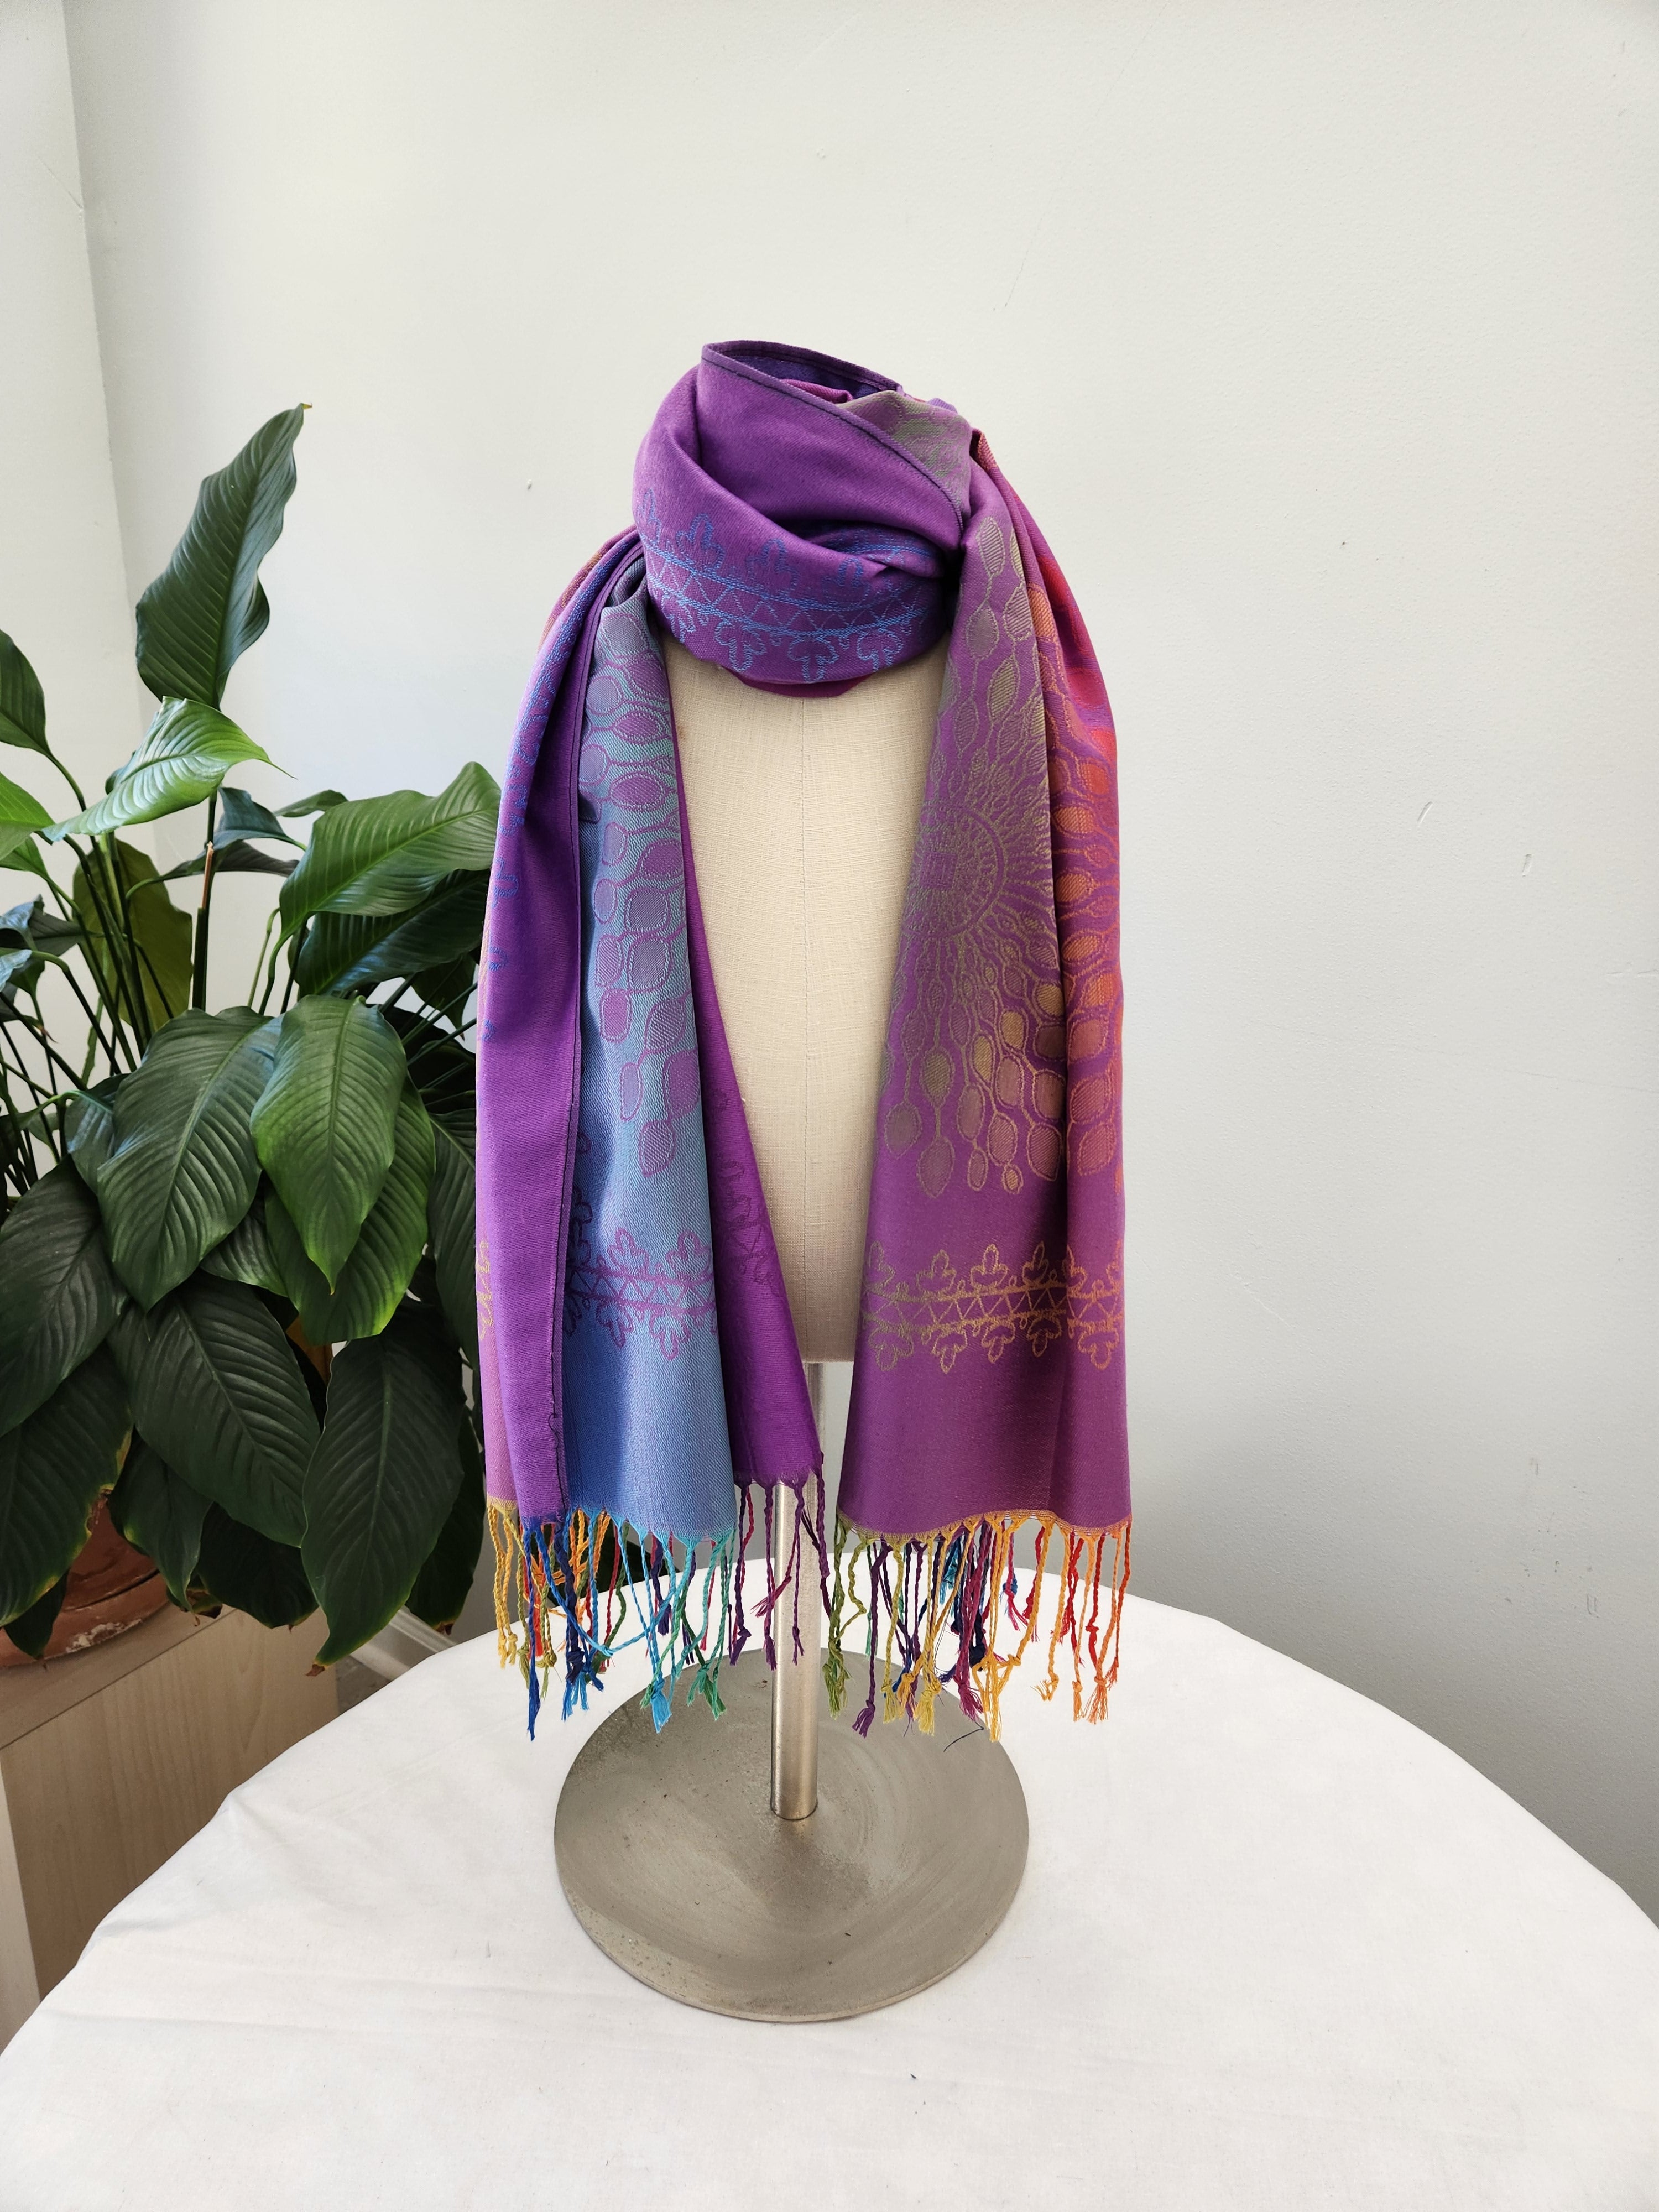 Aztec Design Shawl, Lightweight Rainbow Colors Jewel - Tones, Beach or Lake Cover Up Scarf, Oversized Scarf, Gifts for Moms and Daughter - Wear Sierra